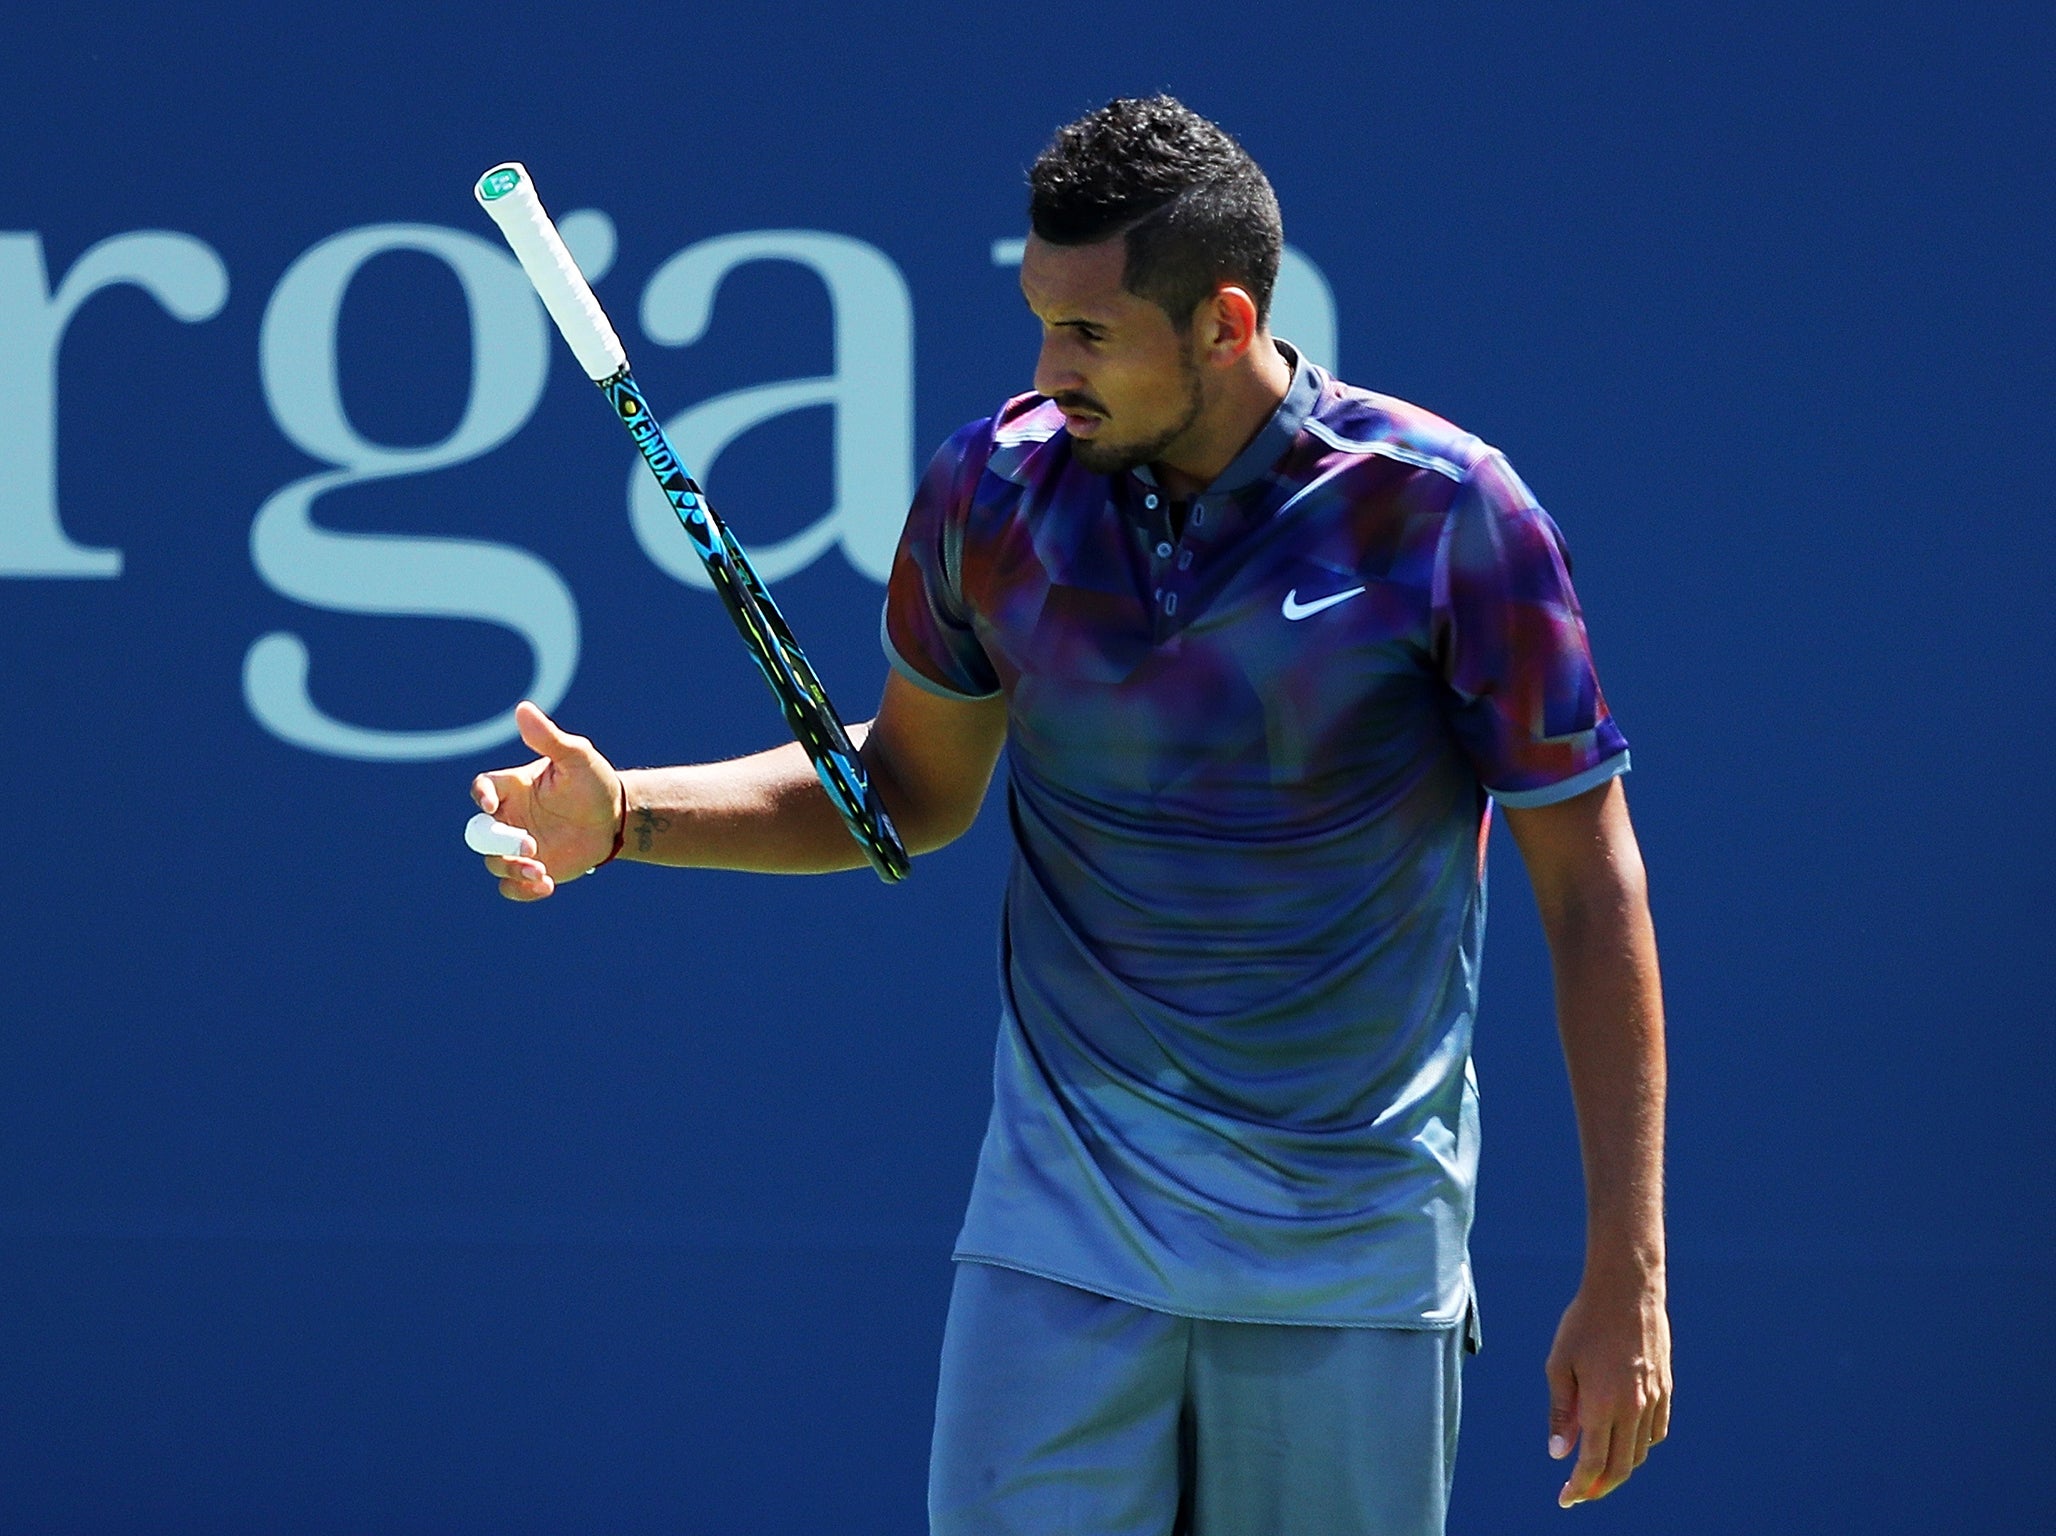 Kyrgios crashed out in the first round of the US Open